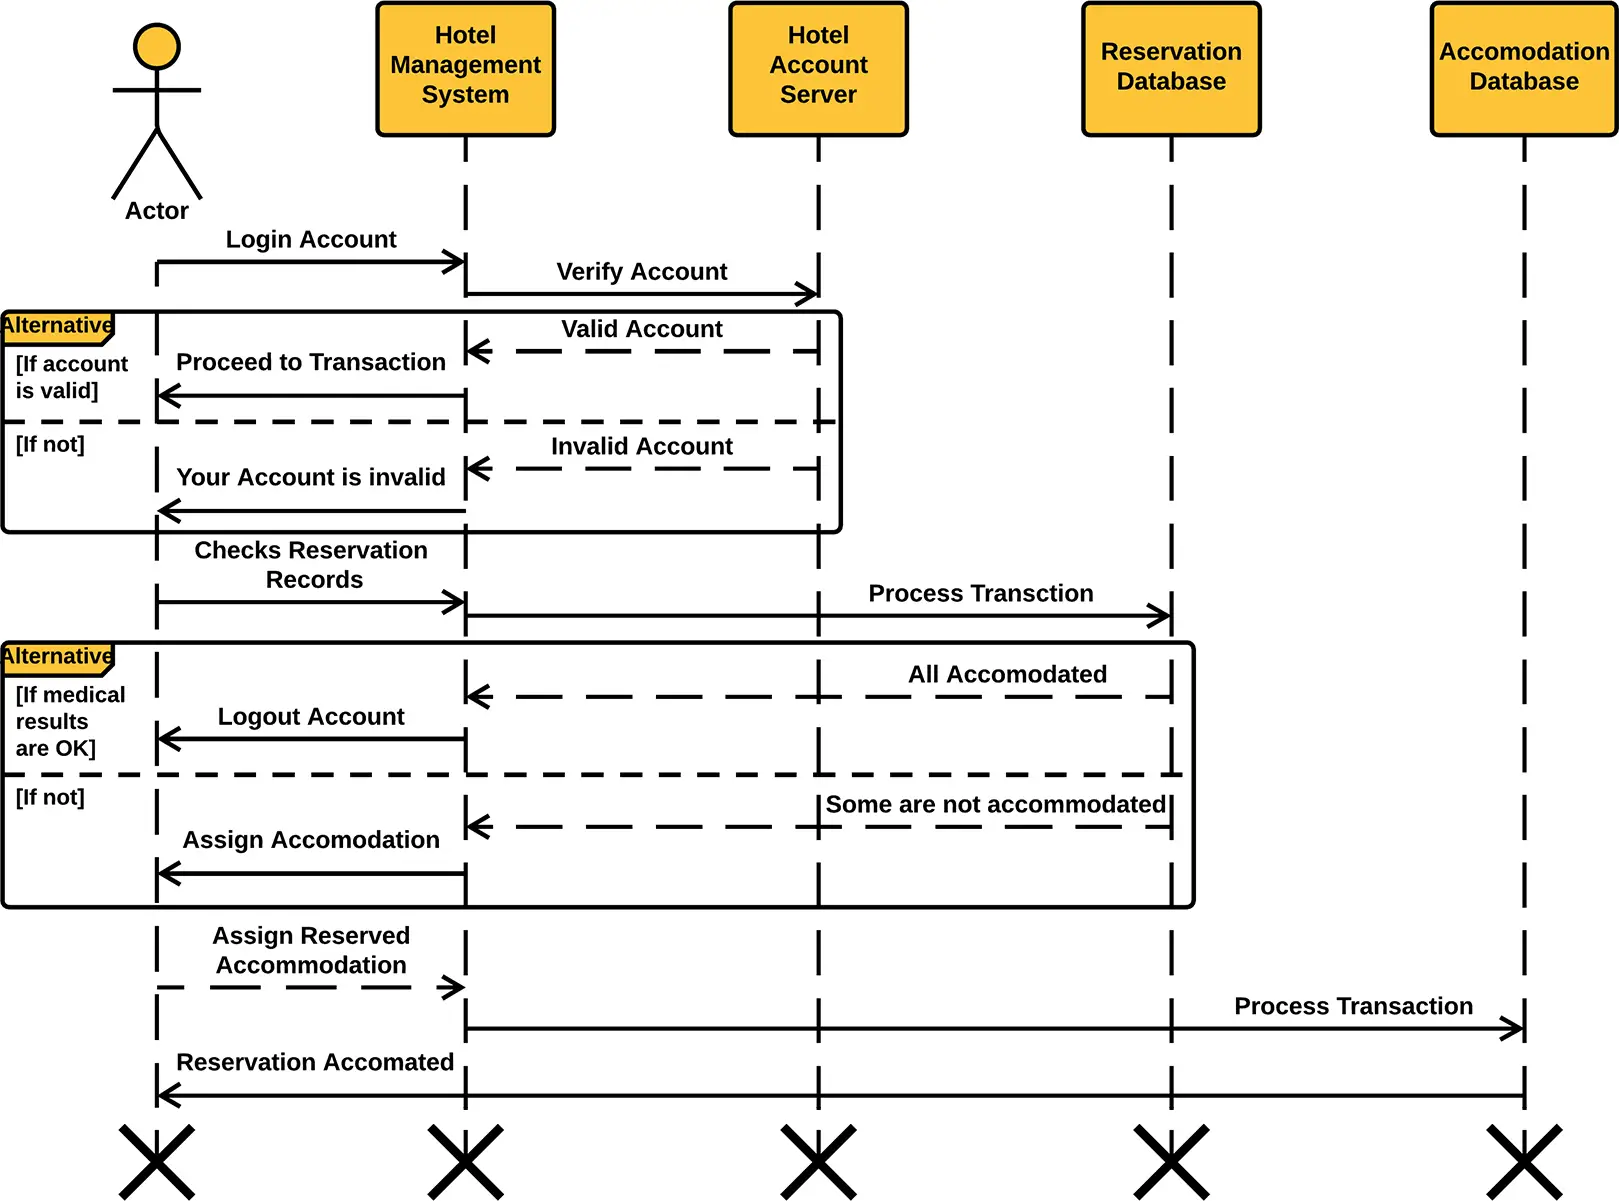 Hotel Management System Sequence Diagram